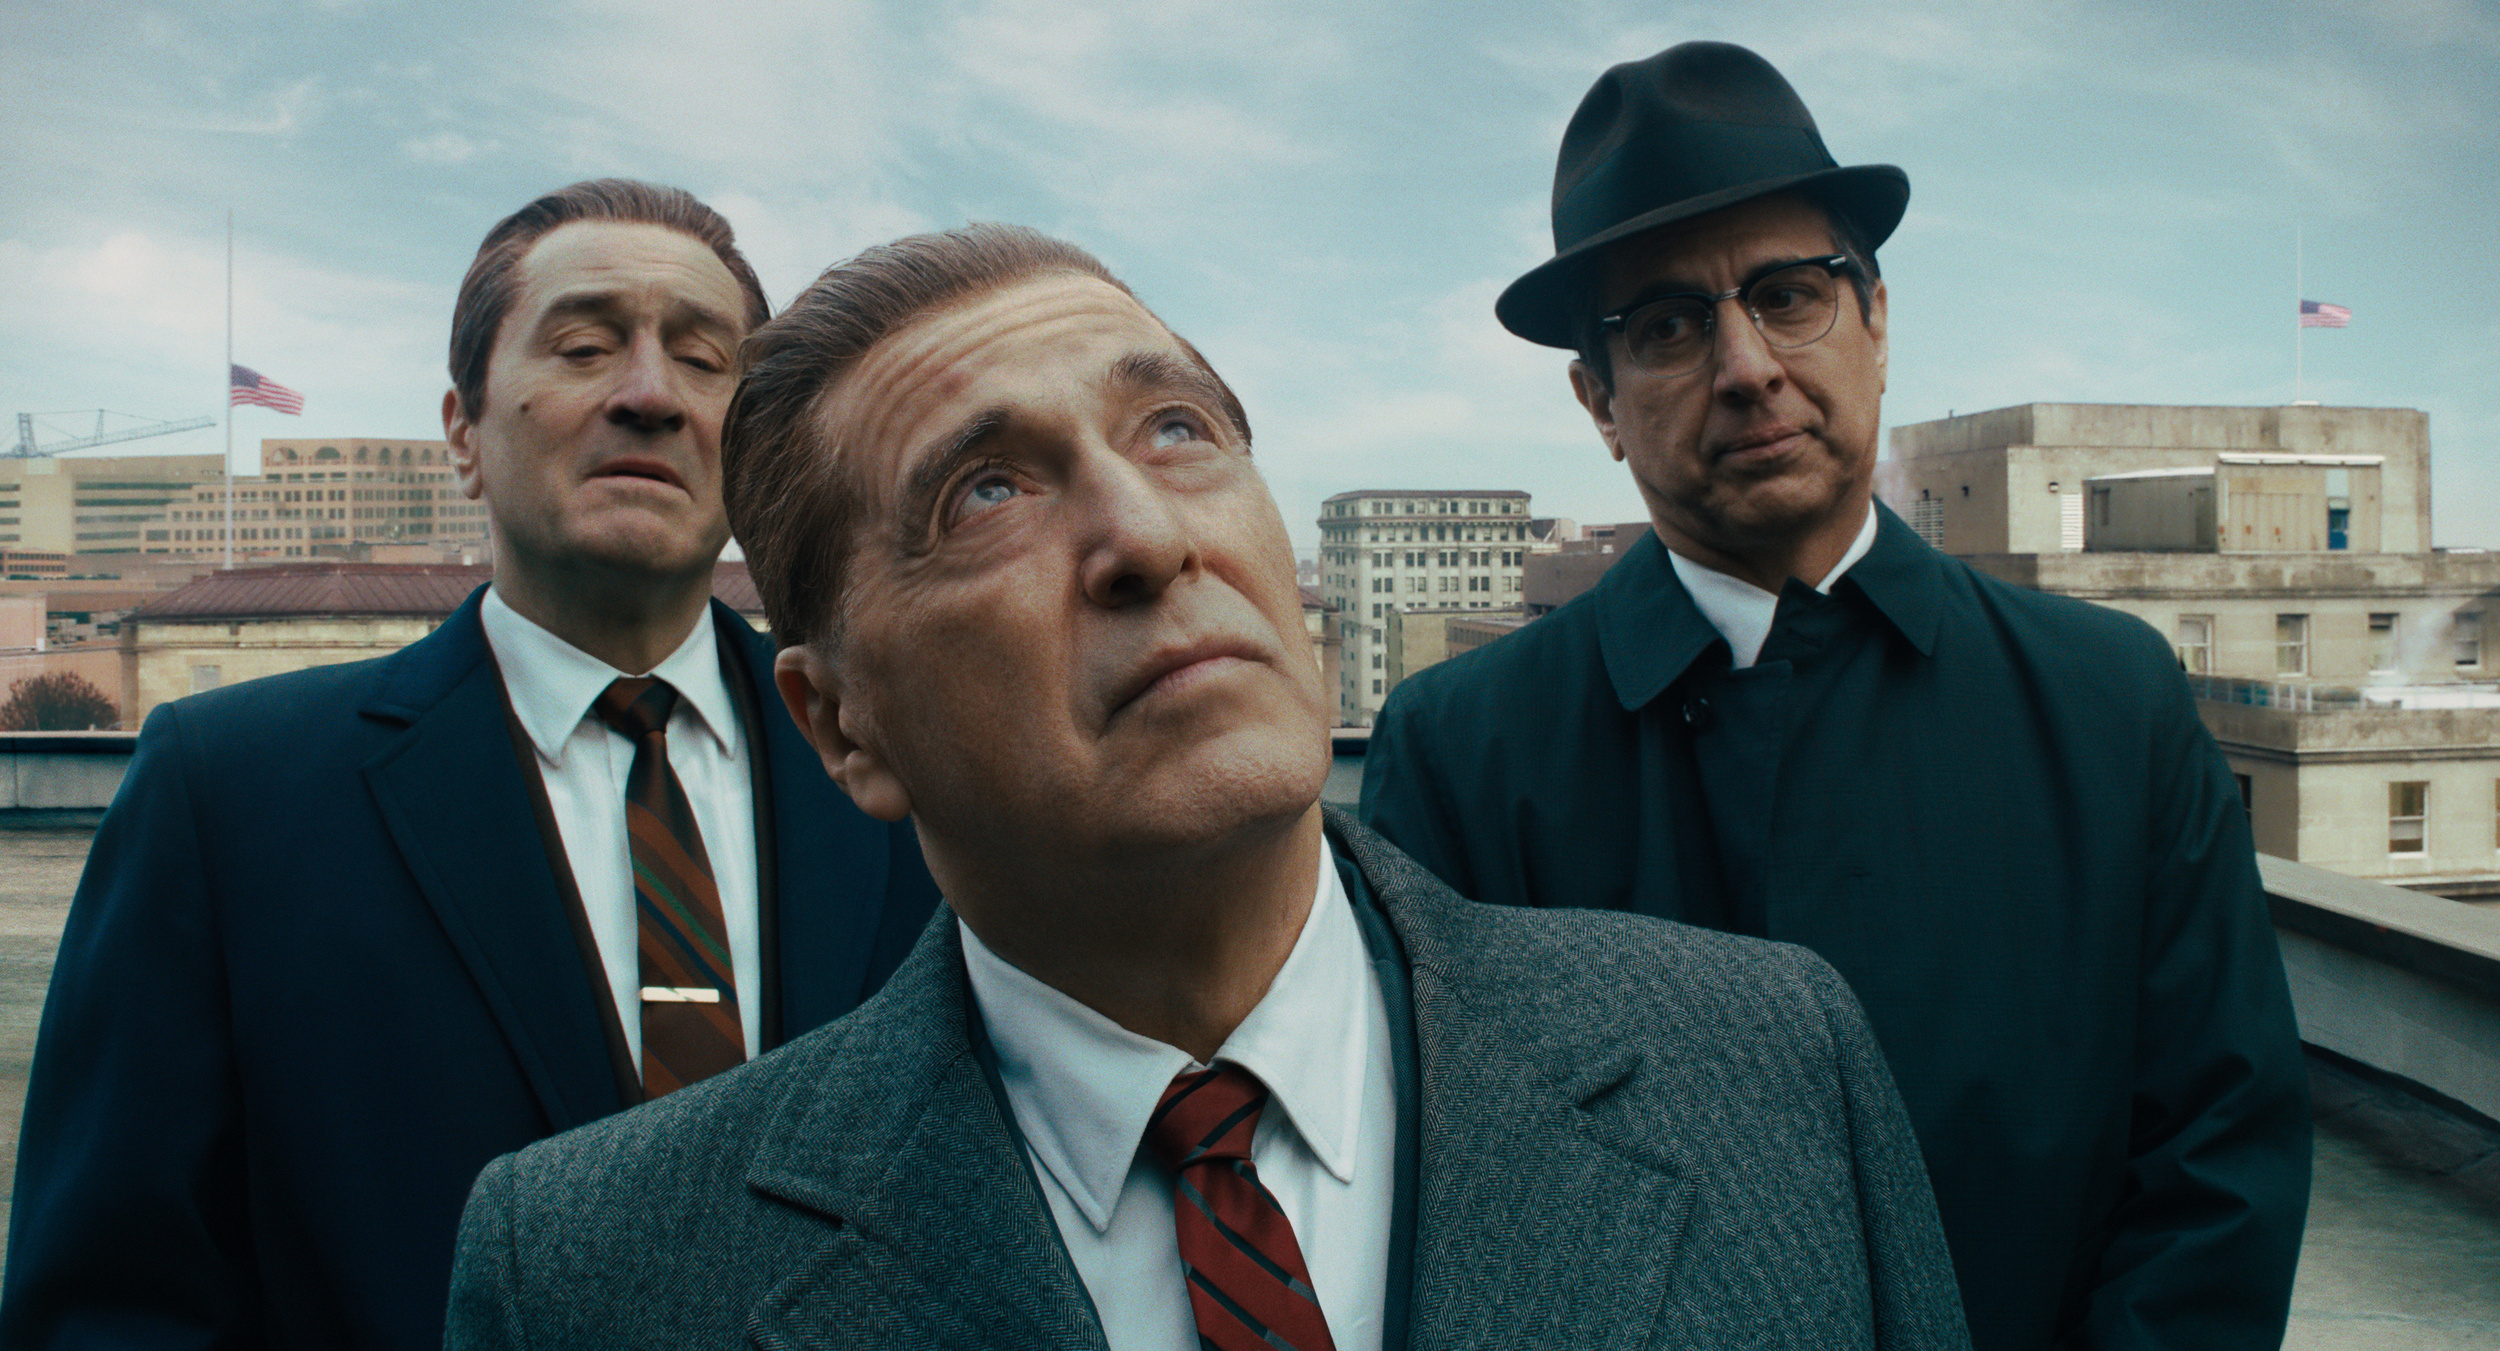 <p>Another film based on a book based on true events,<em> The Irishman</em> not only has a star-studded cast, it’s got an incredible plot. Any fan of crime family stories will find this movie wholly enthralling. And as expected from Joe Pesci, Robert DeNiro, and Al Pacino, the performances are amazing. </p><p><a href='https://www.msn.com/en-us/community/channel/vid-cj9pqbr0vn9in2b6ddcd8sfgpfq6x6utp44fssrv6mc2gtybw0us'>Follow us on MSN to see more of our exclusive entertainment content.</a></p>